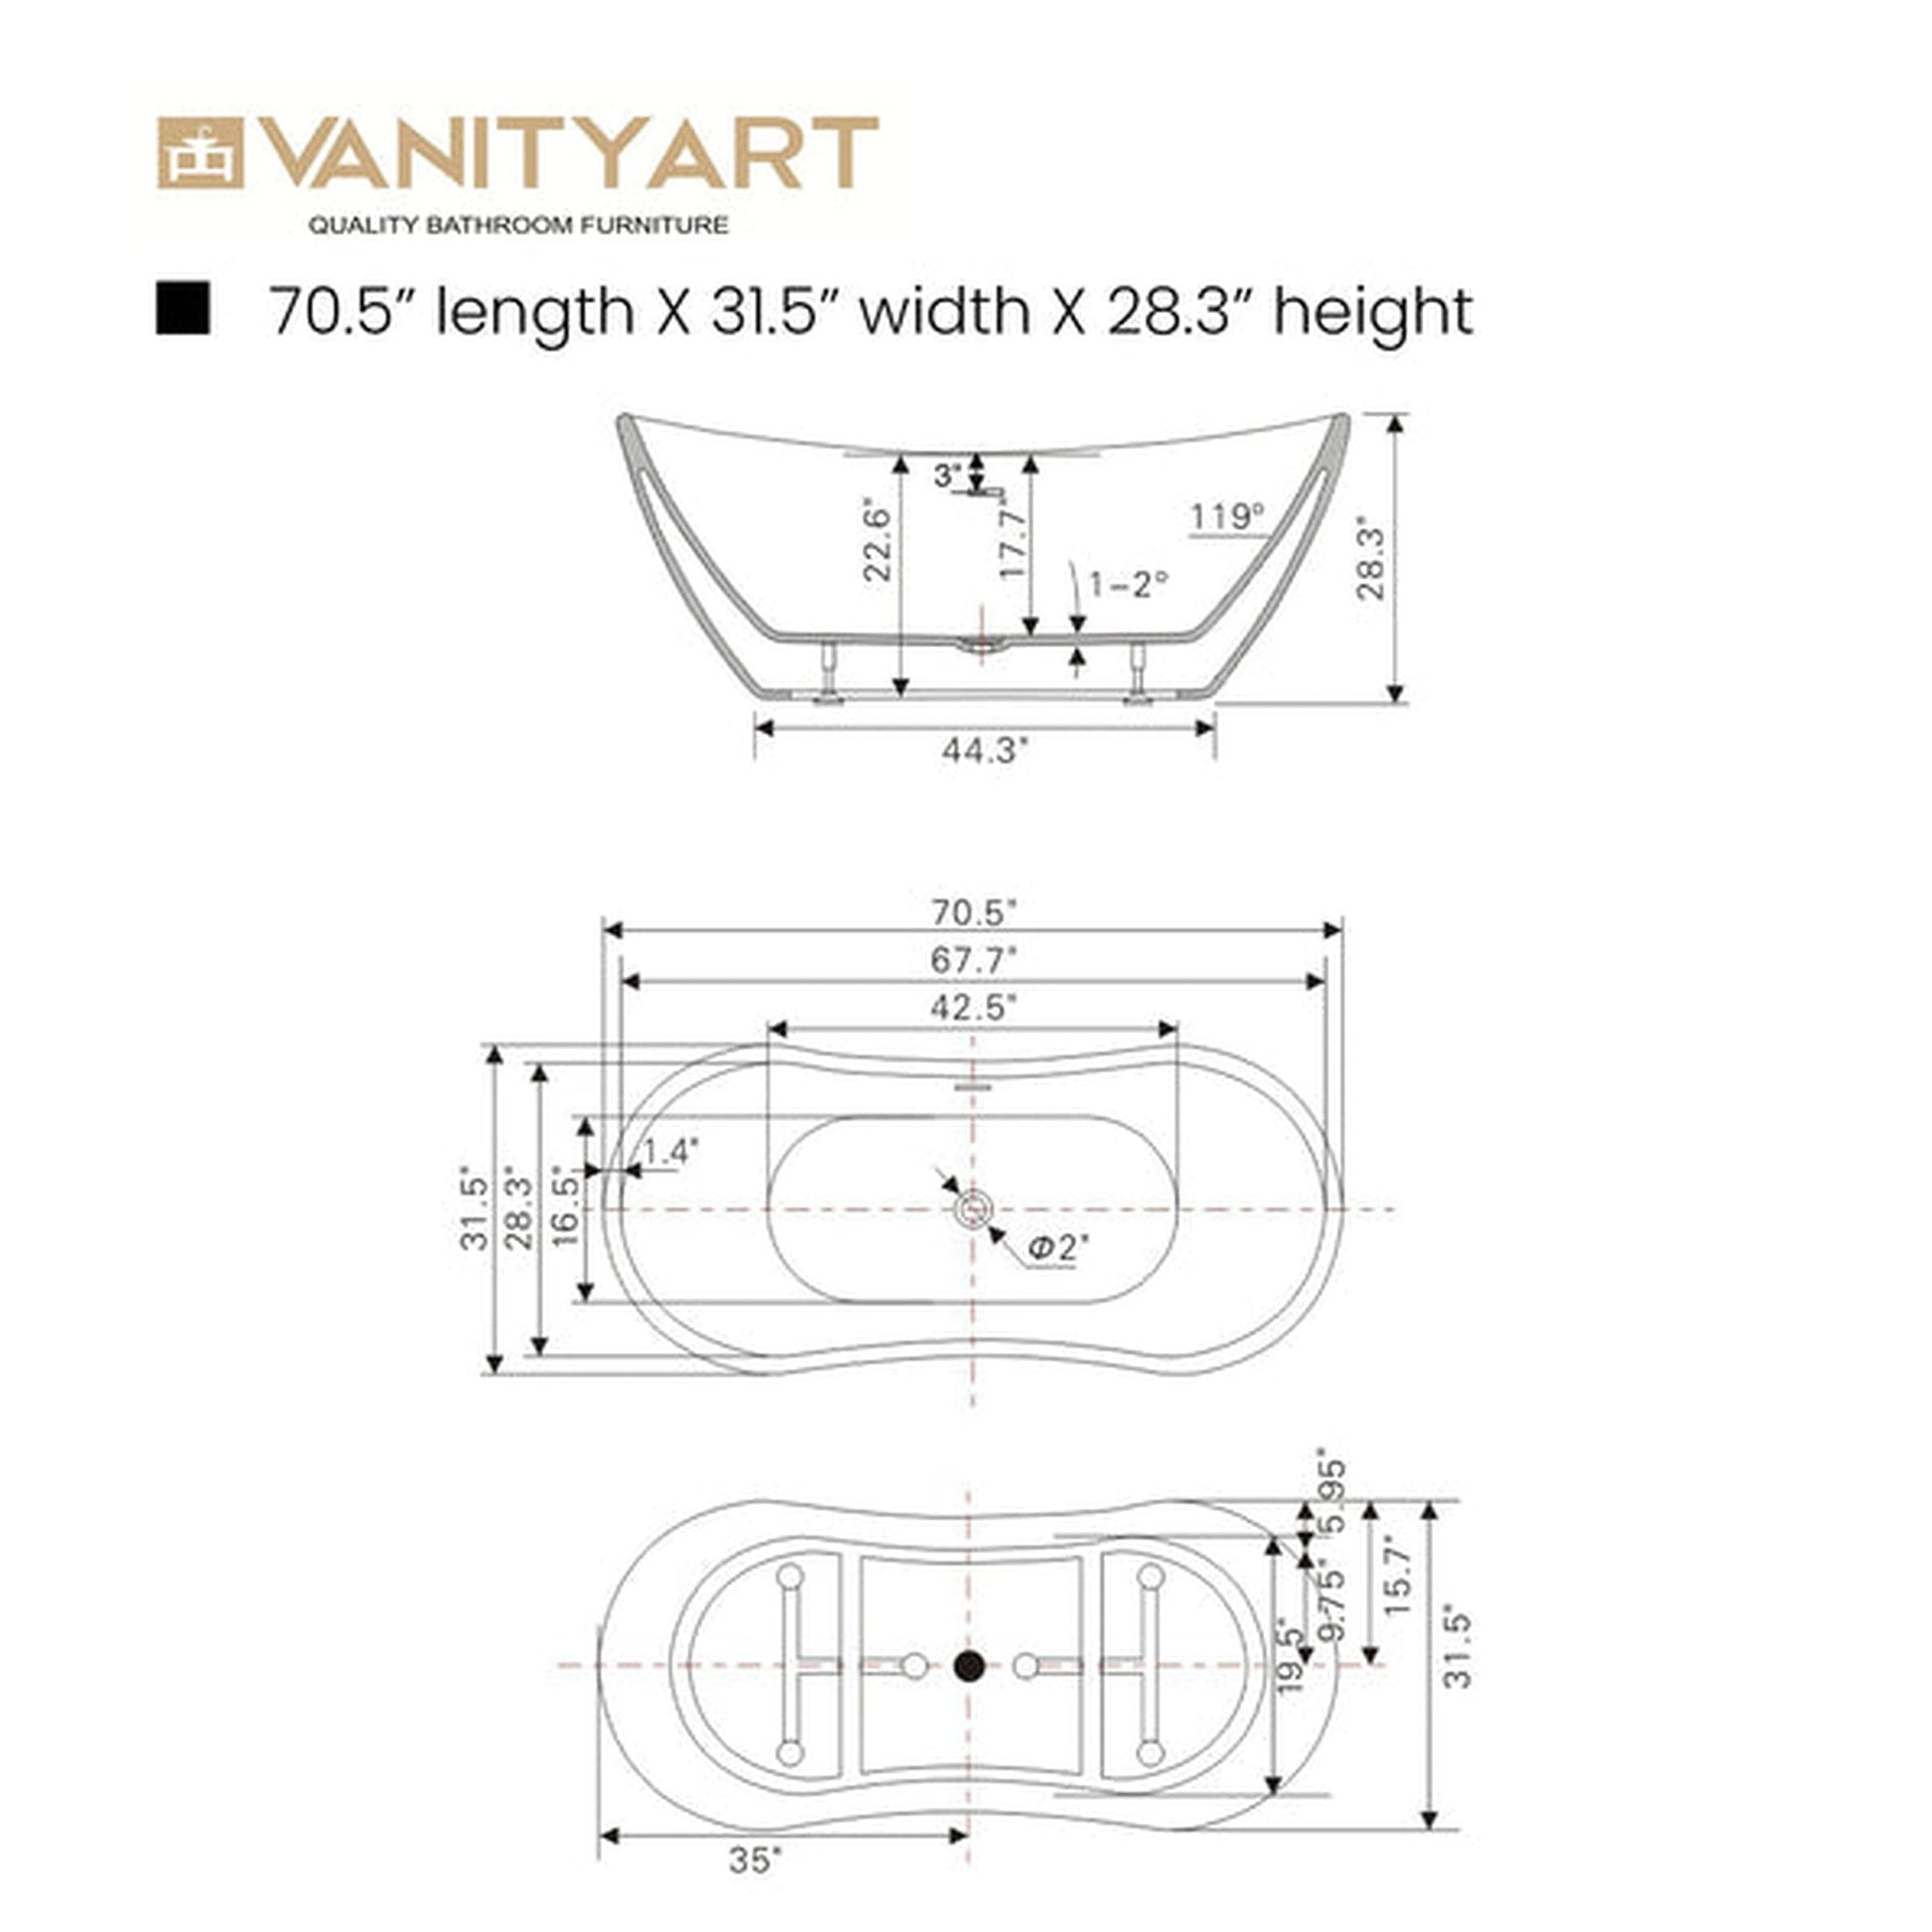 Vanity Art 71" W x 28" H White Acrylic Freestanding Bathtub With Titanium Gold Pop-up Drain, Slotted Overflow and Flexible Drain Hose